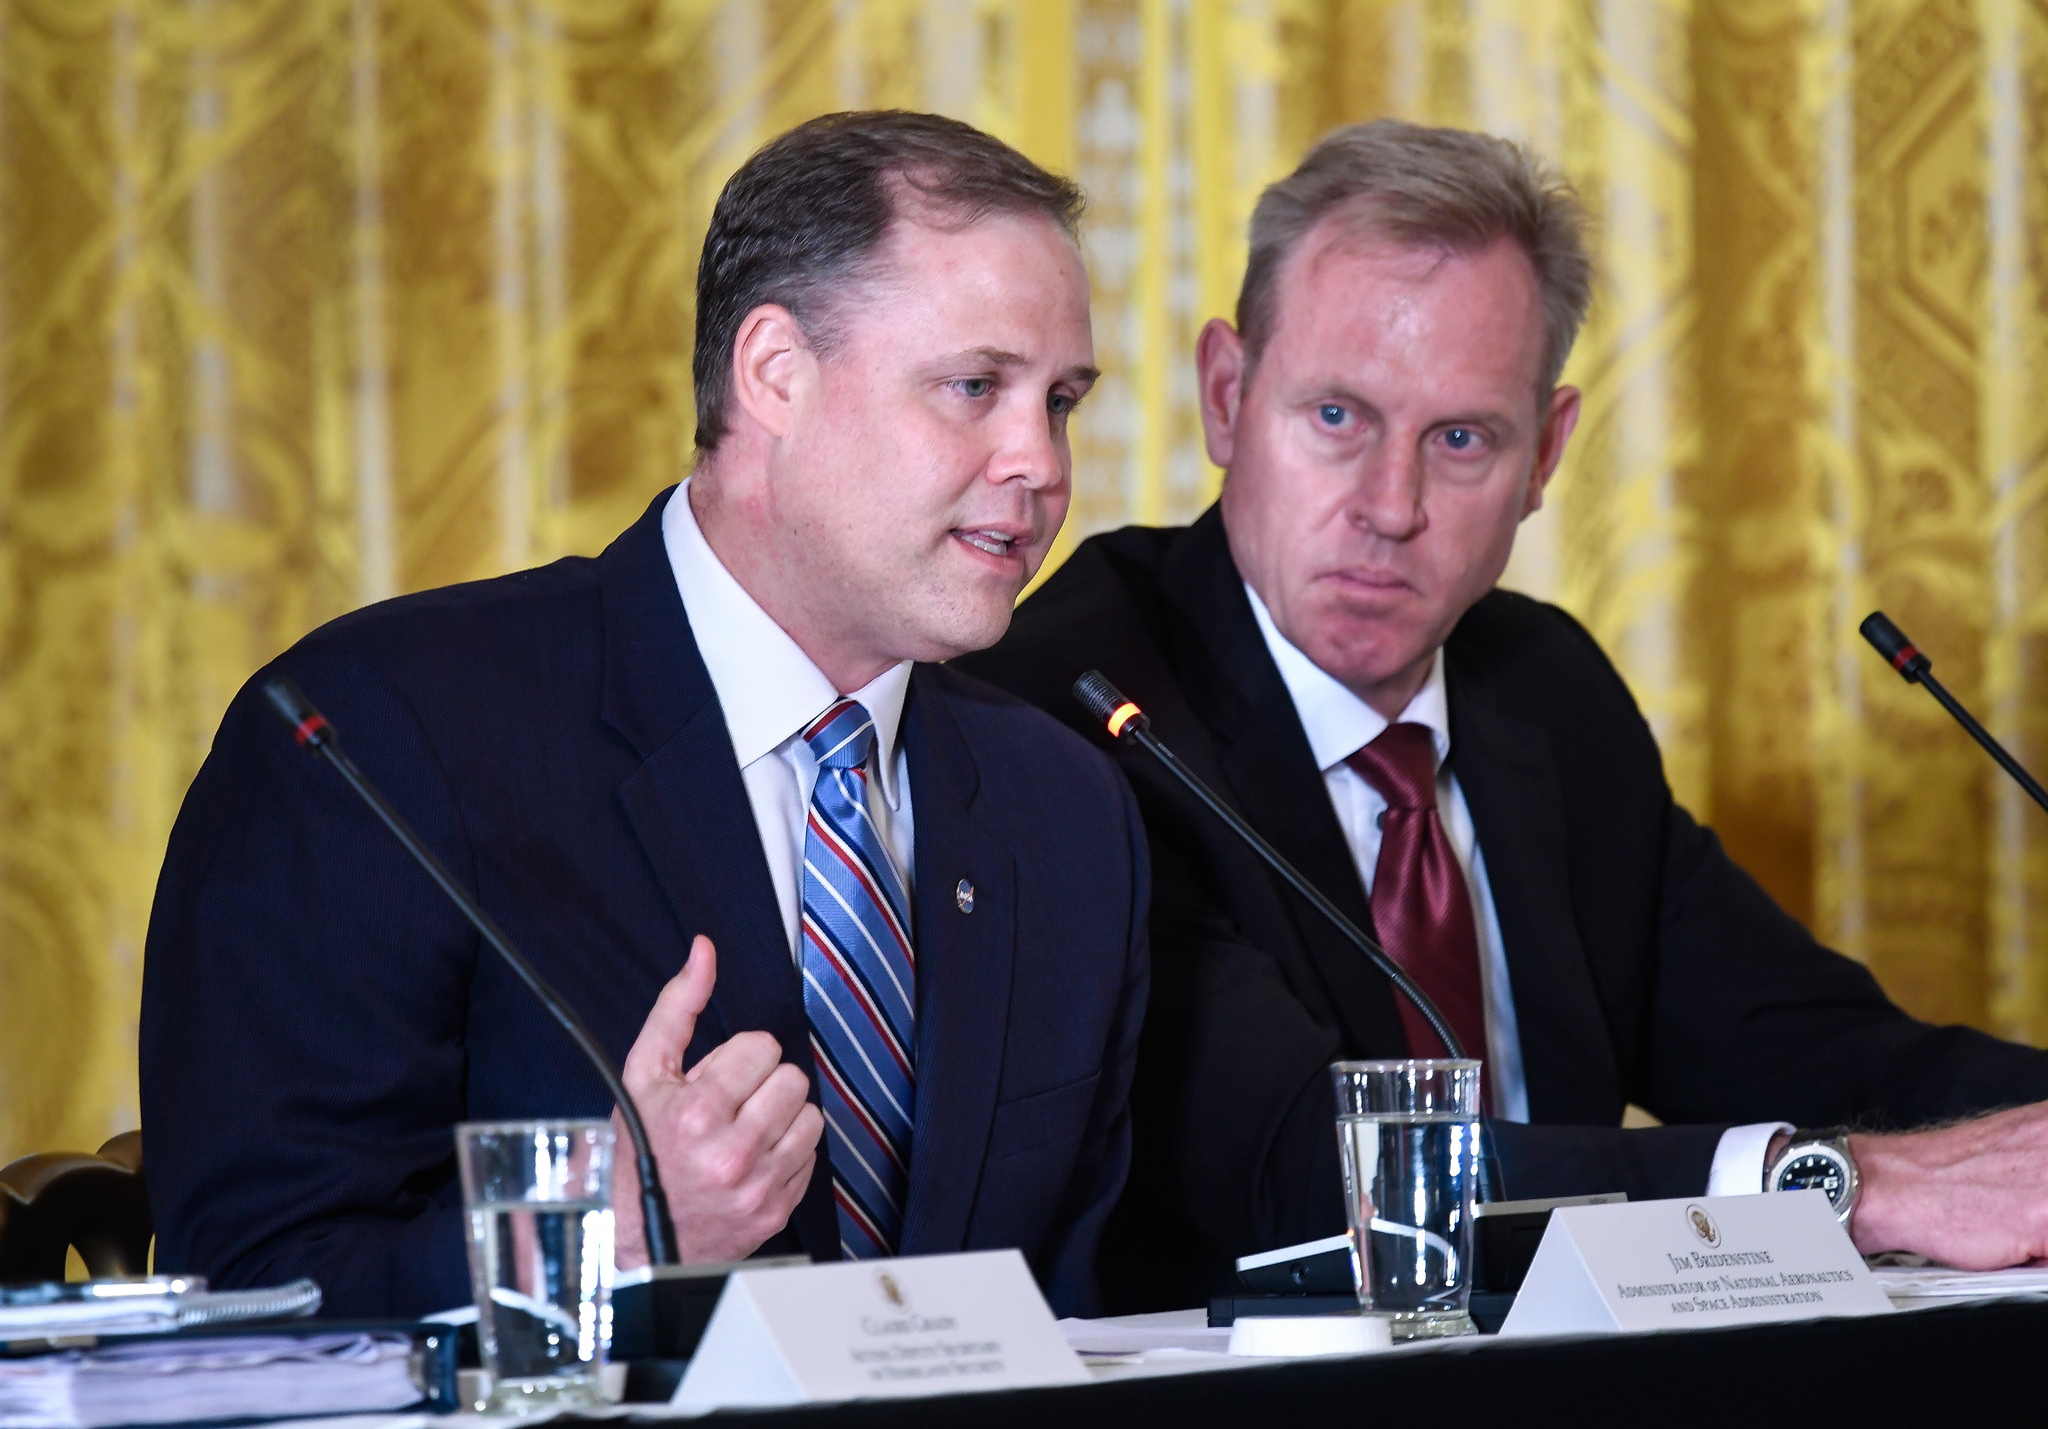 NASA Administrator Jim Bridenstine speaks during a meeting of the National Space Council in the East Room of the White House